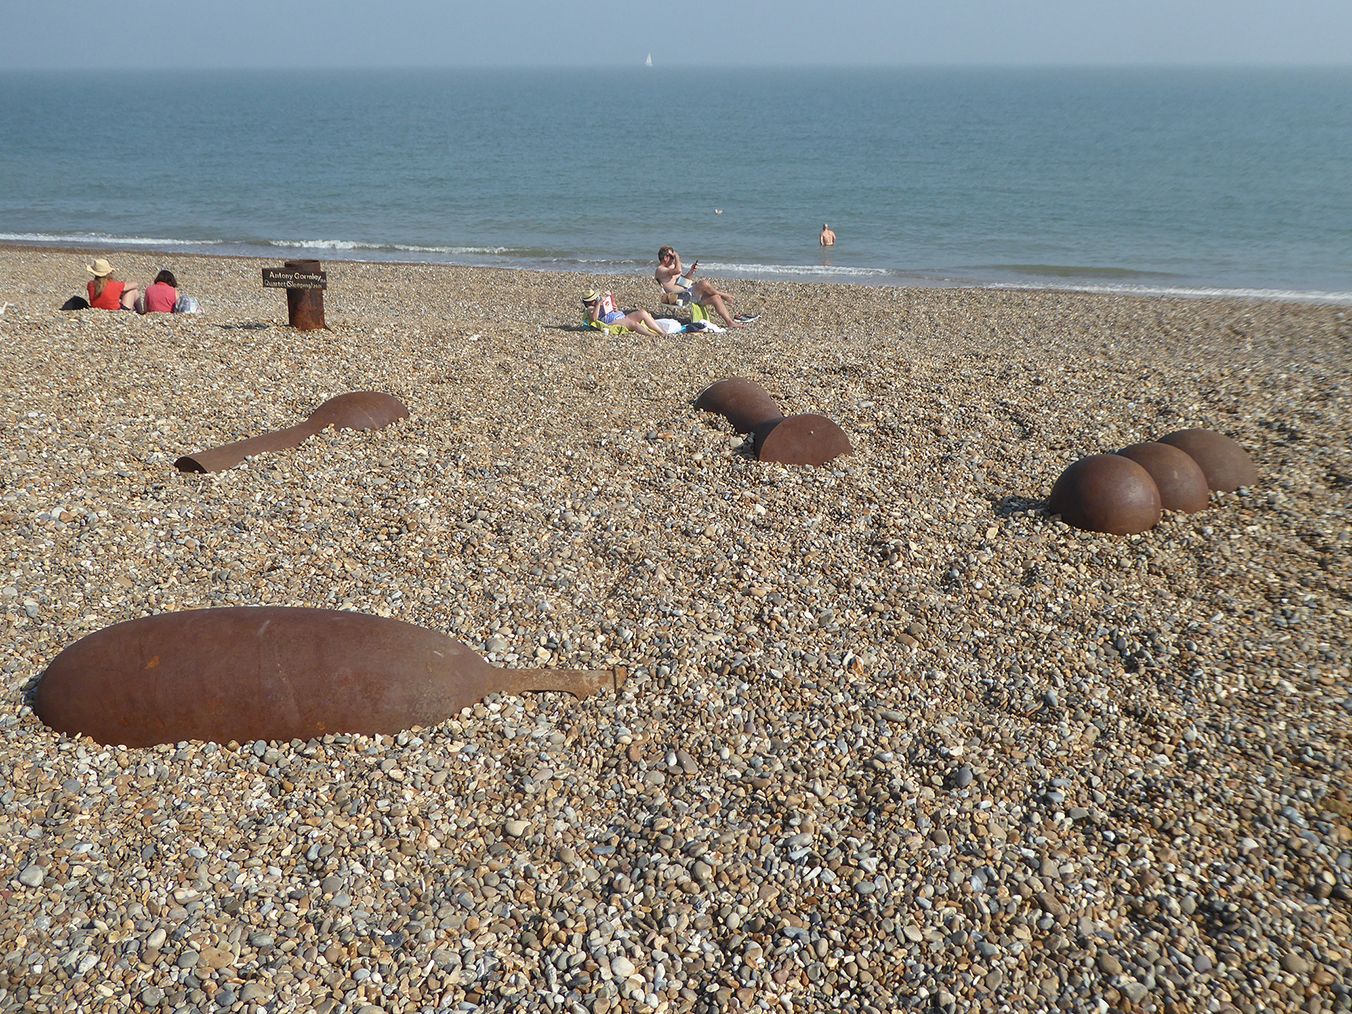 Sex toys on the beach? Antony Gormley seaside sculptures—likened to vibrators—fall foul of planning laws